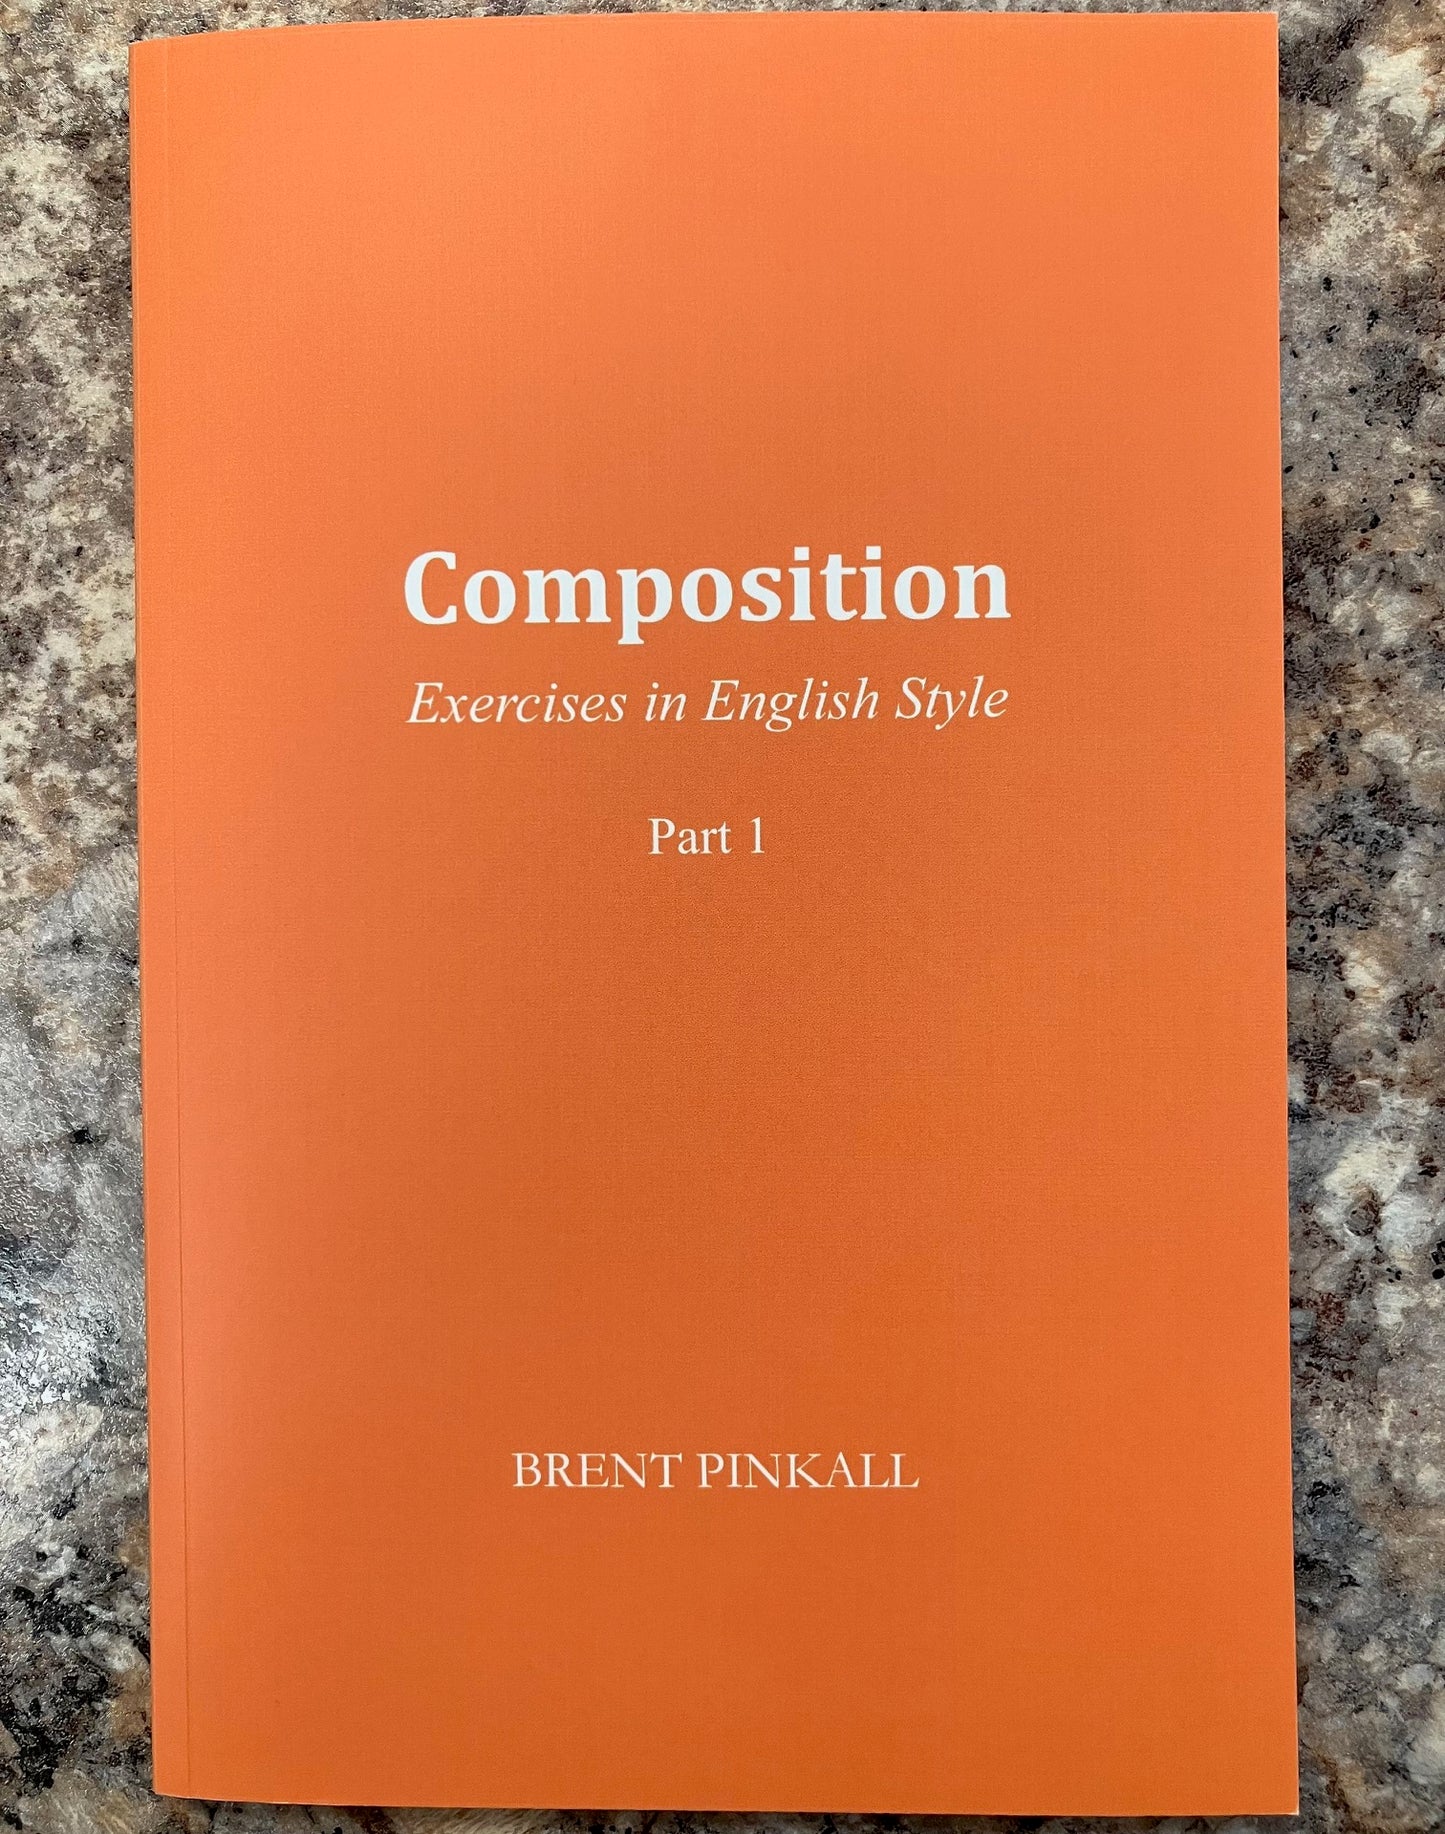 Composition: Excercises in English Style Pt. 1 (Pinkall)